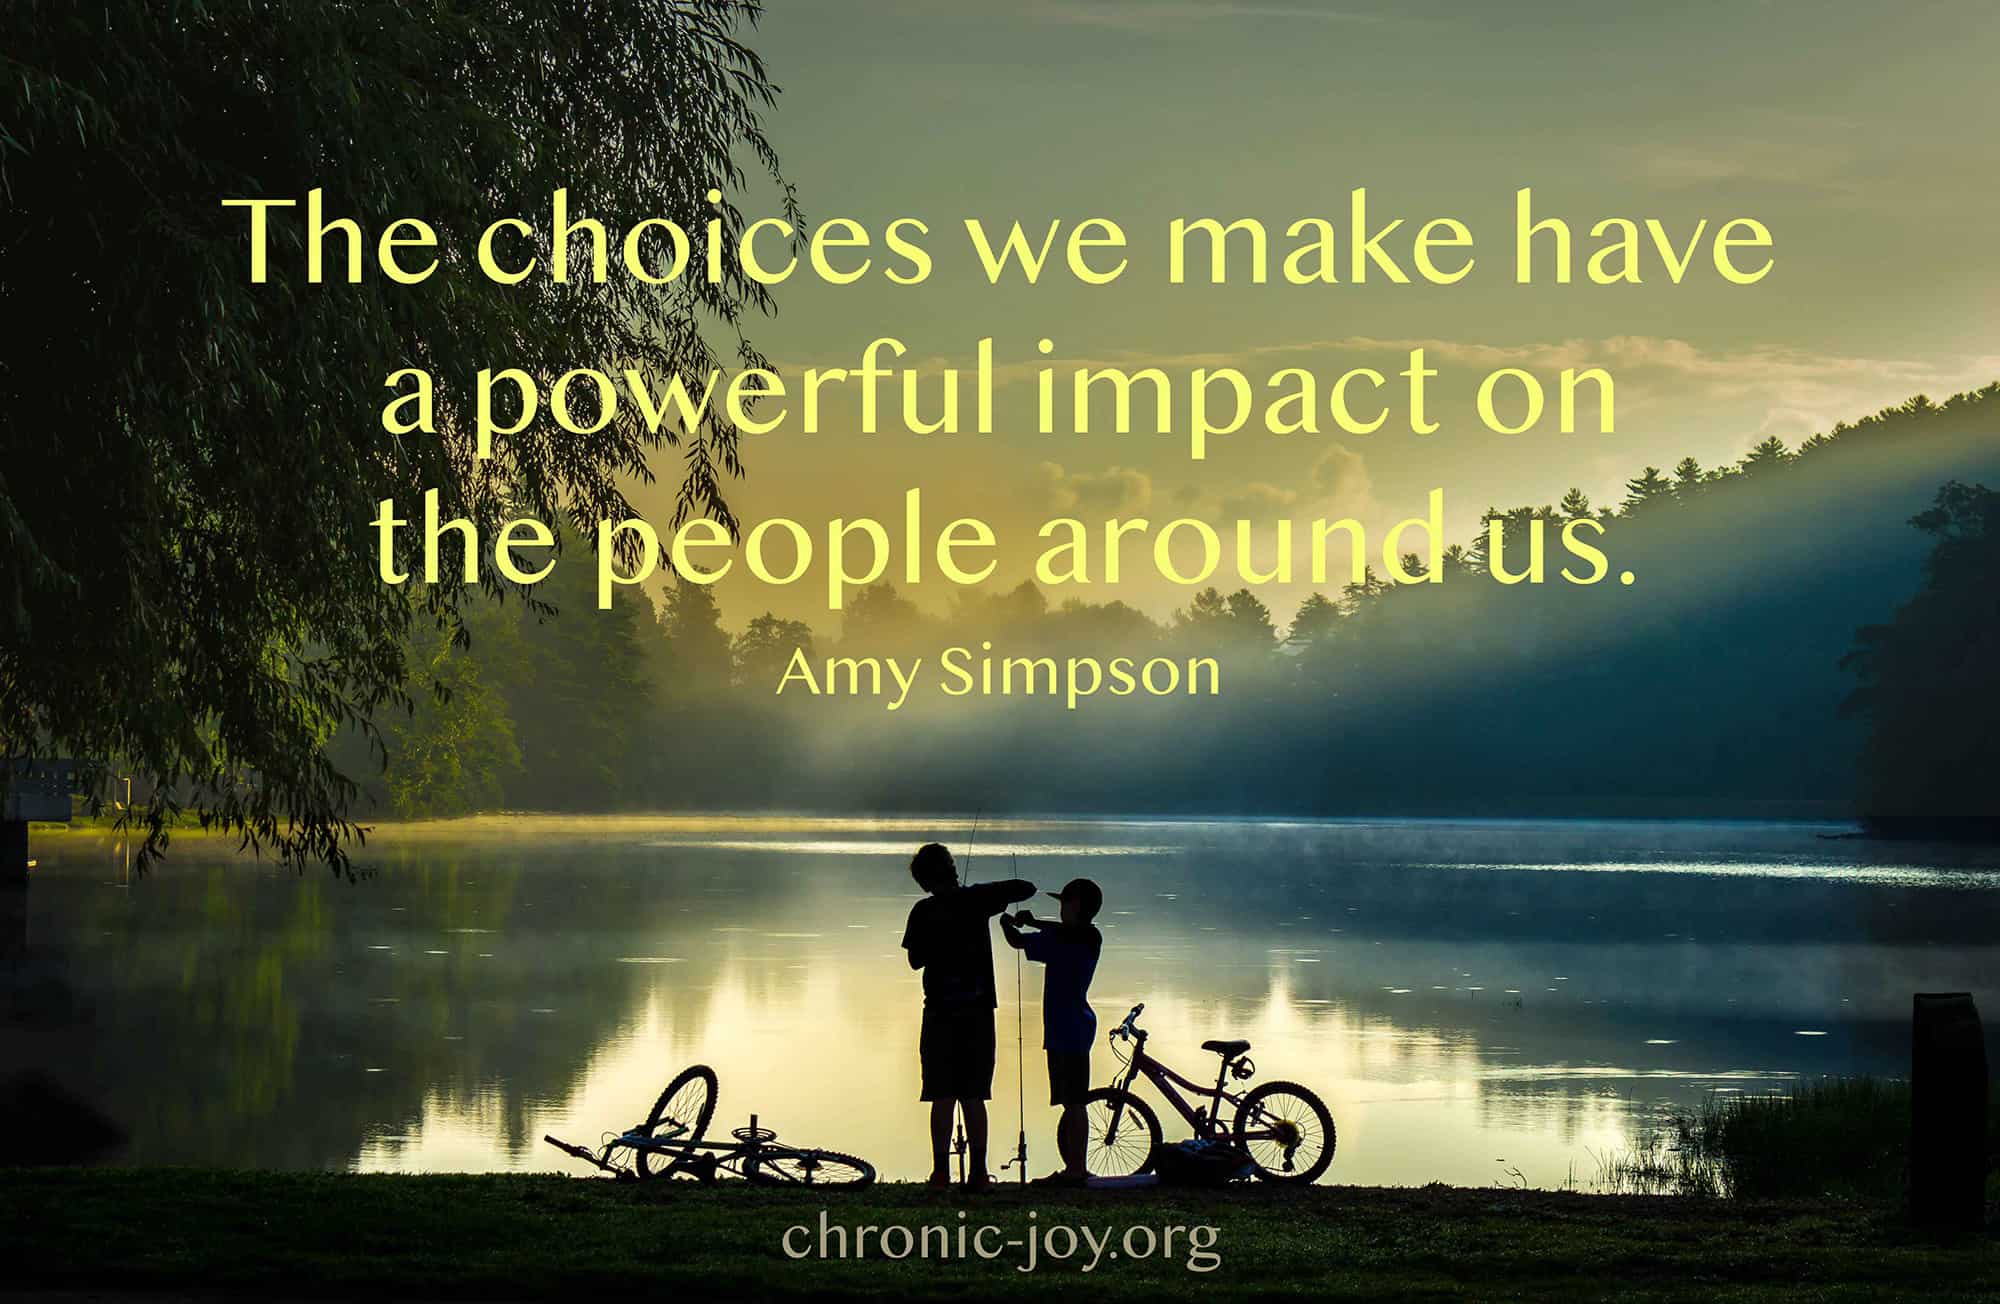 The choices we make have a powerful impact on the people around us